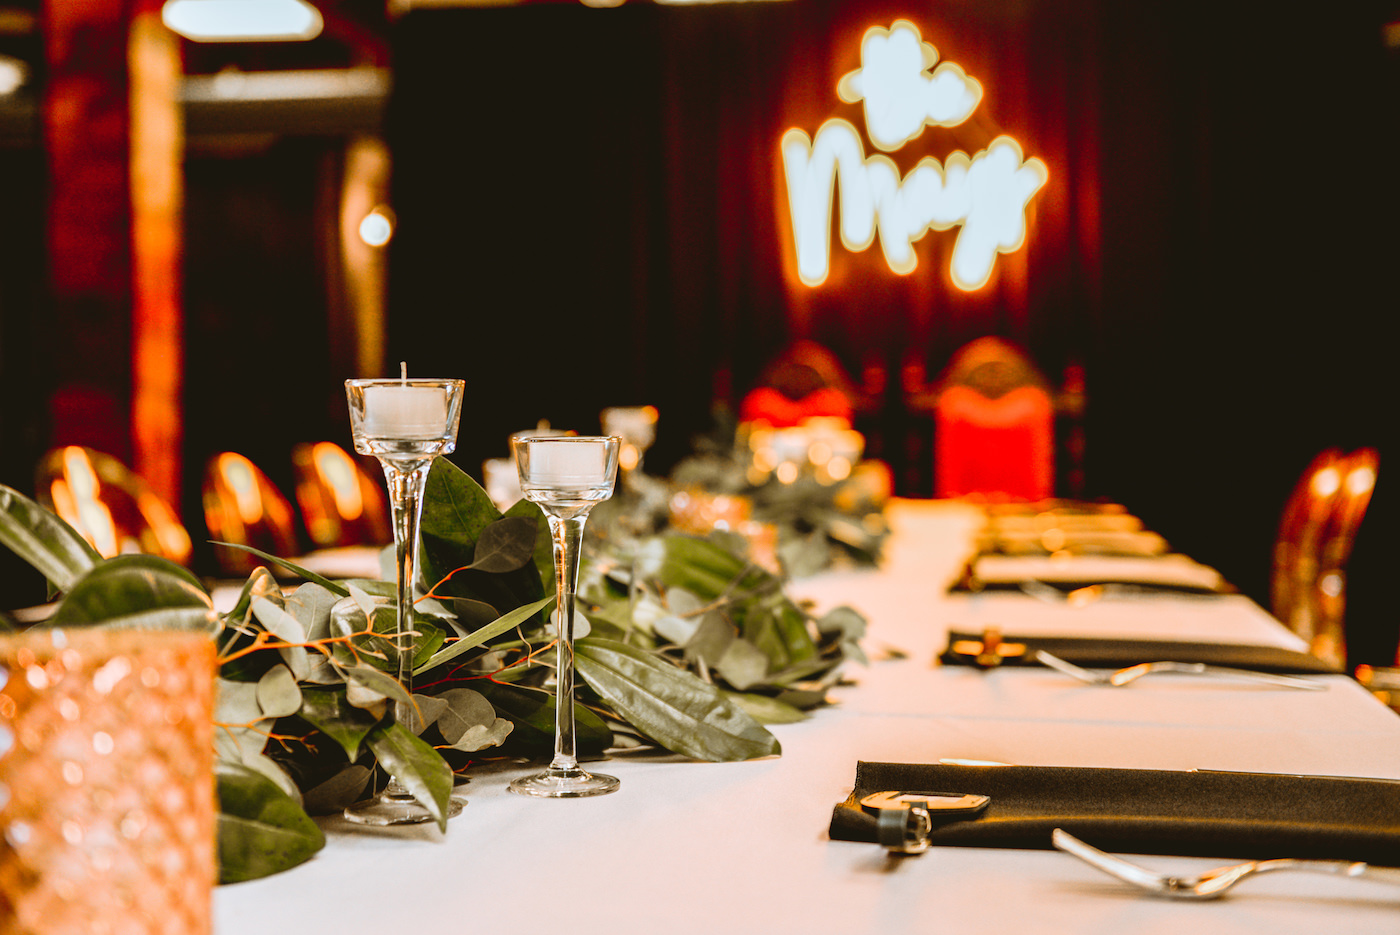 Wedding Reception Feasting Table with Clear Ghost Chairs and Greenery Garland Centerpiece with Tea Light Votive Candles and Black Napkins | Bride and Groom Vintage Chairs with Neon Sign Backdrop | St. Pete Wedding Venue Station House